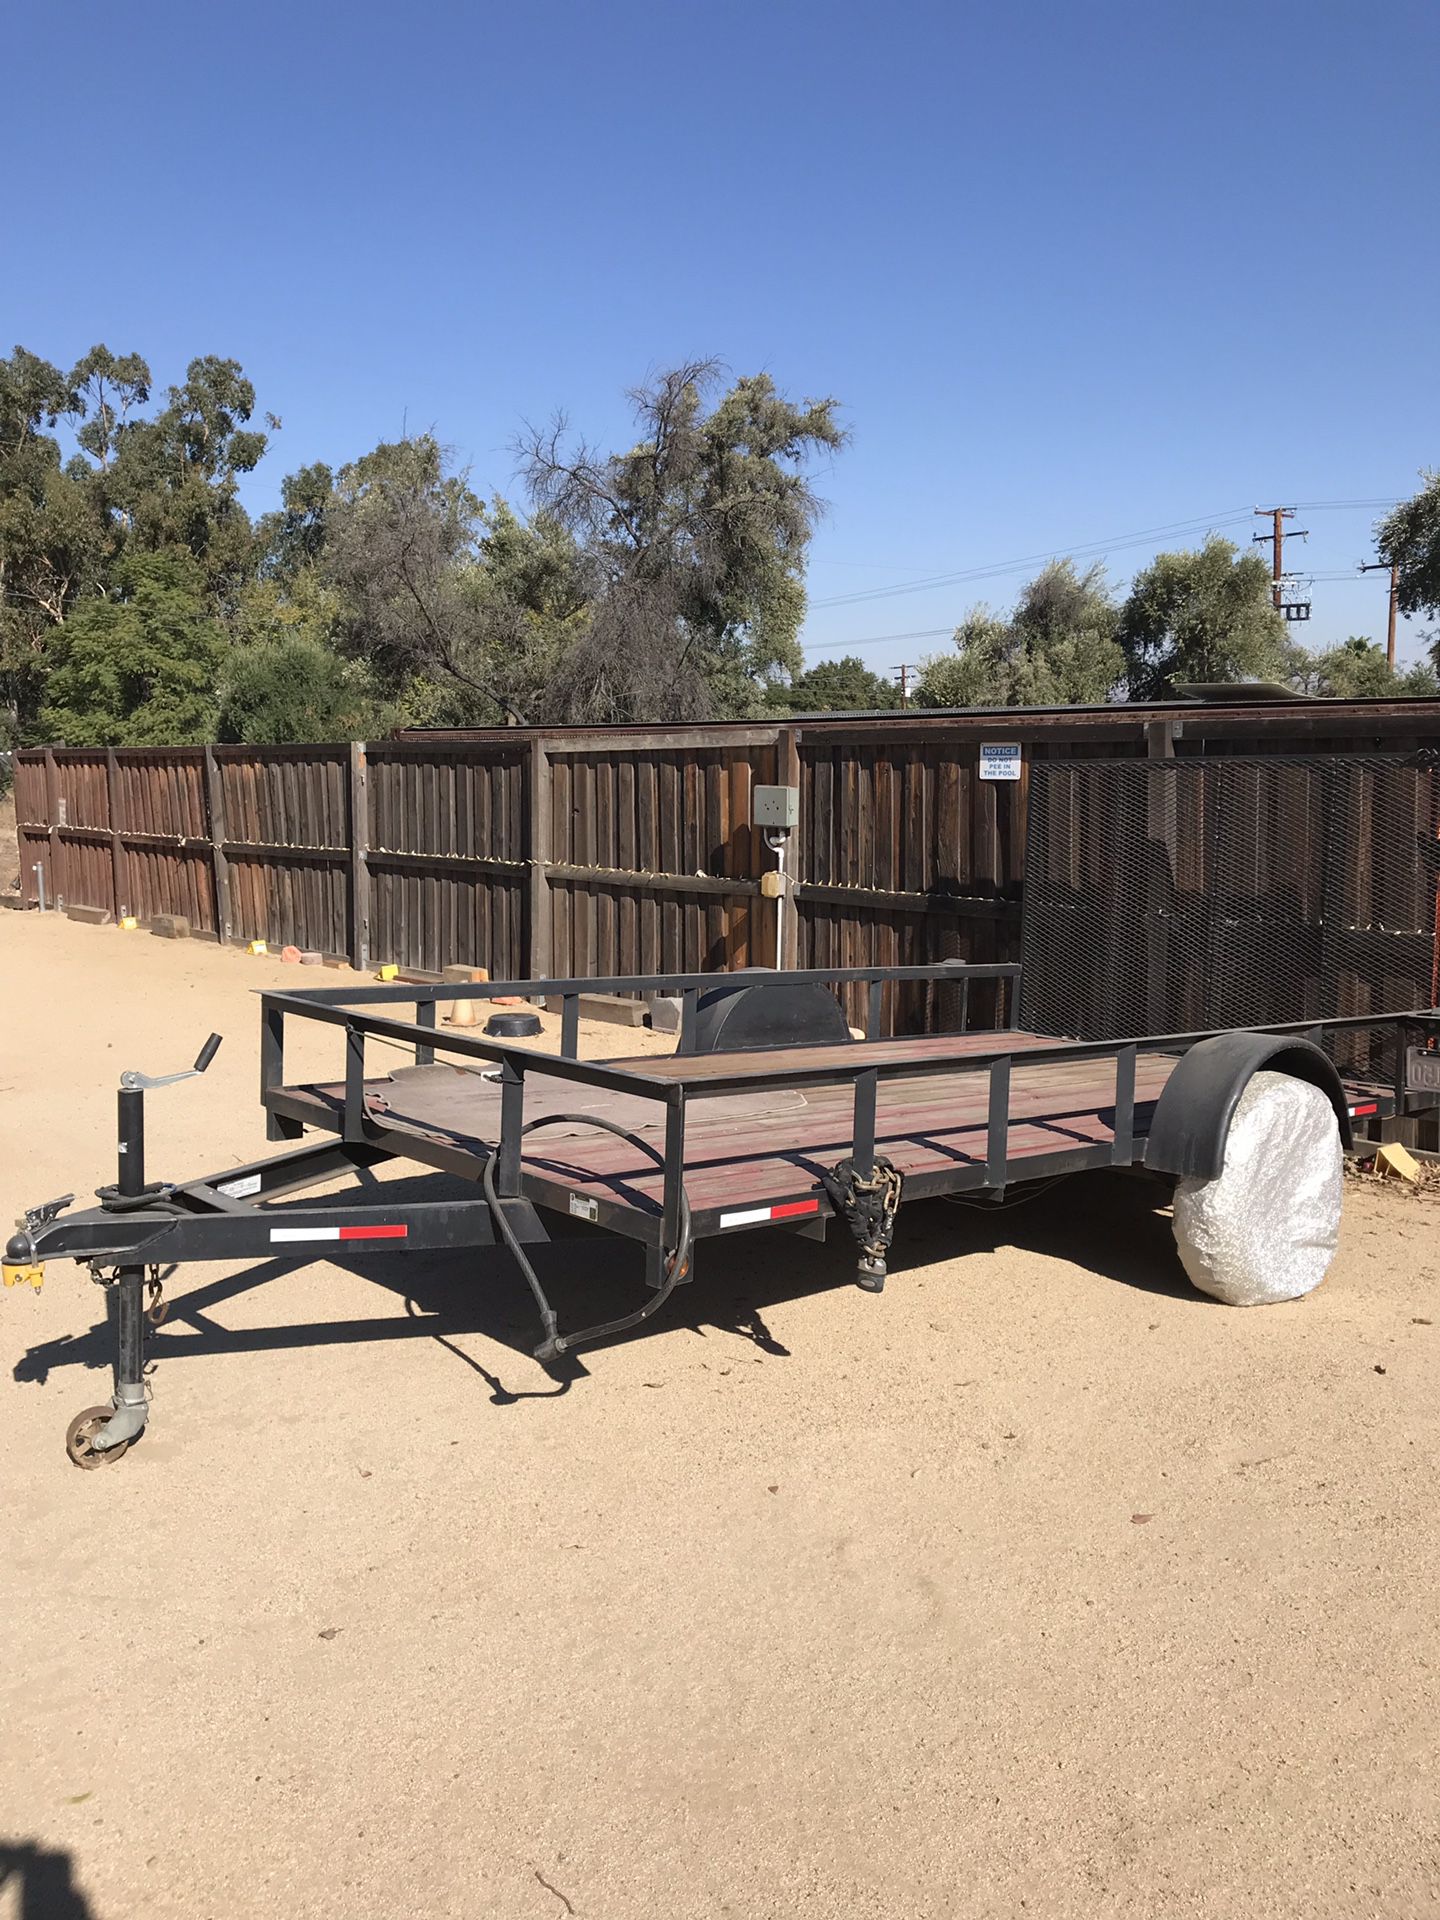 6.5X12 motorcycle quad utility trailer 2016 model works great . Title in hand current tags $1,950 dead firm